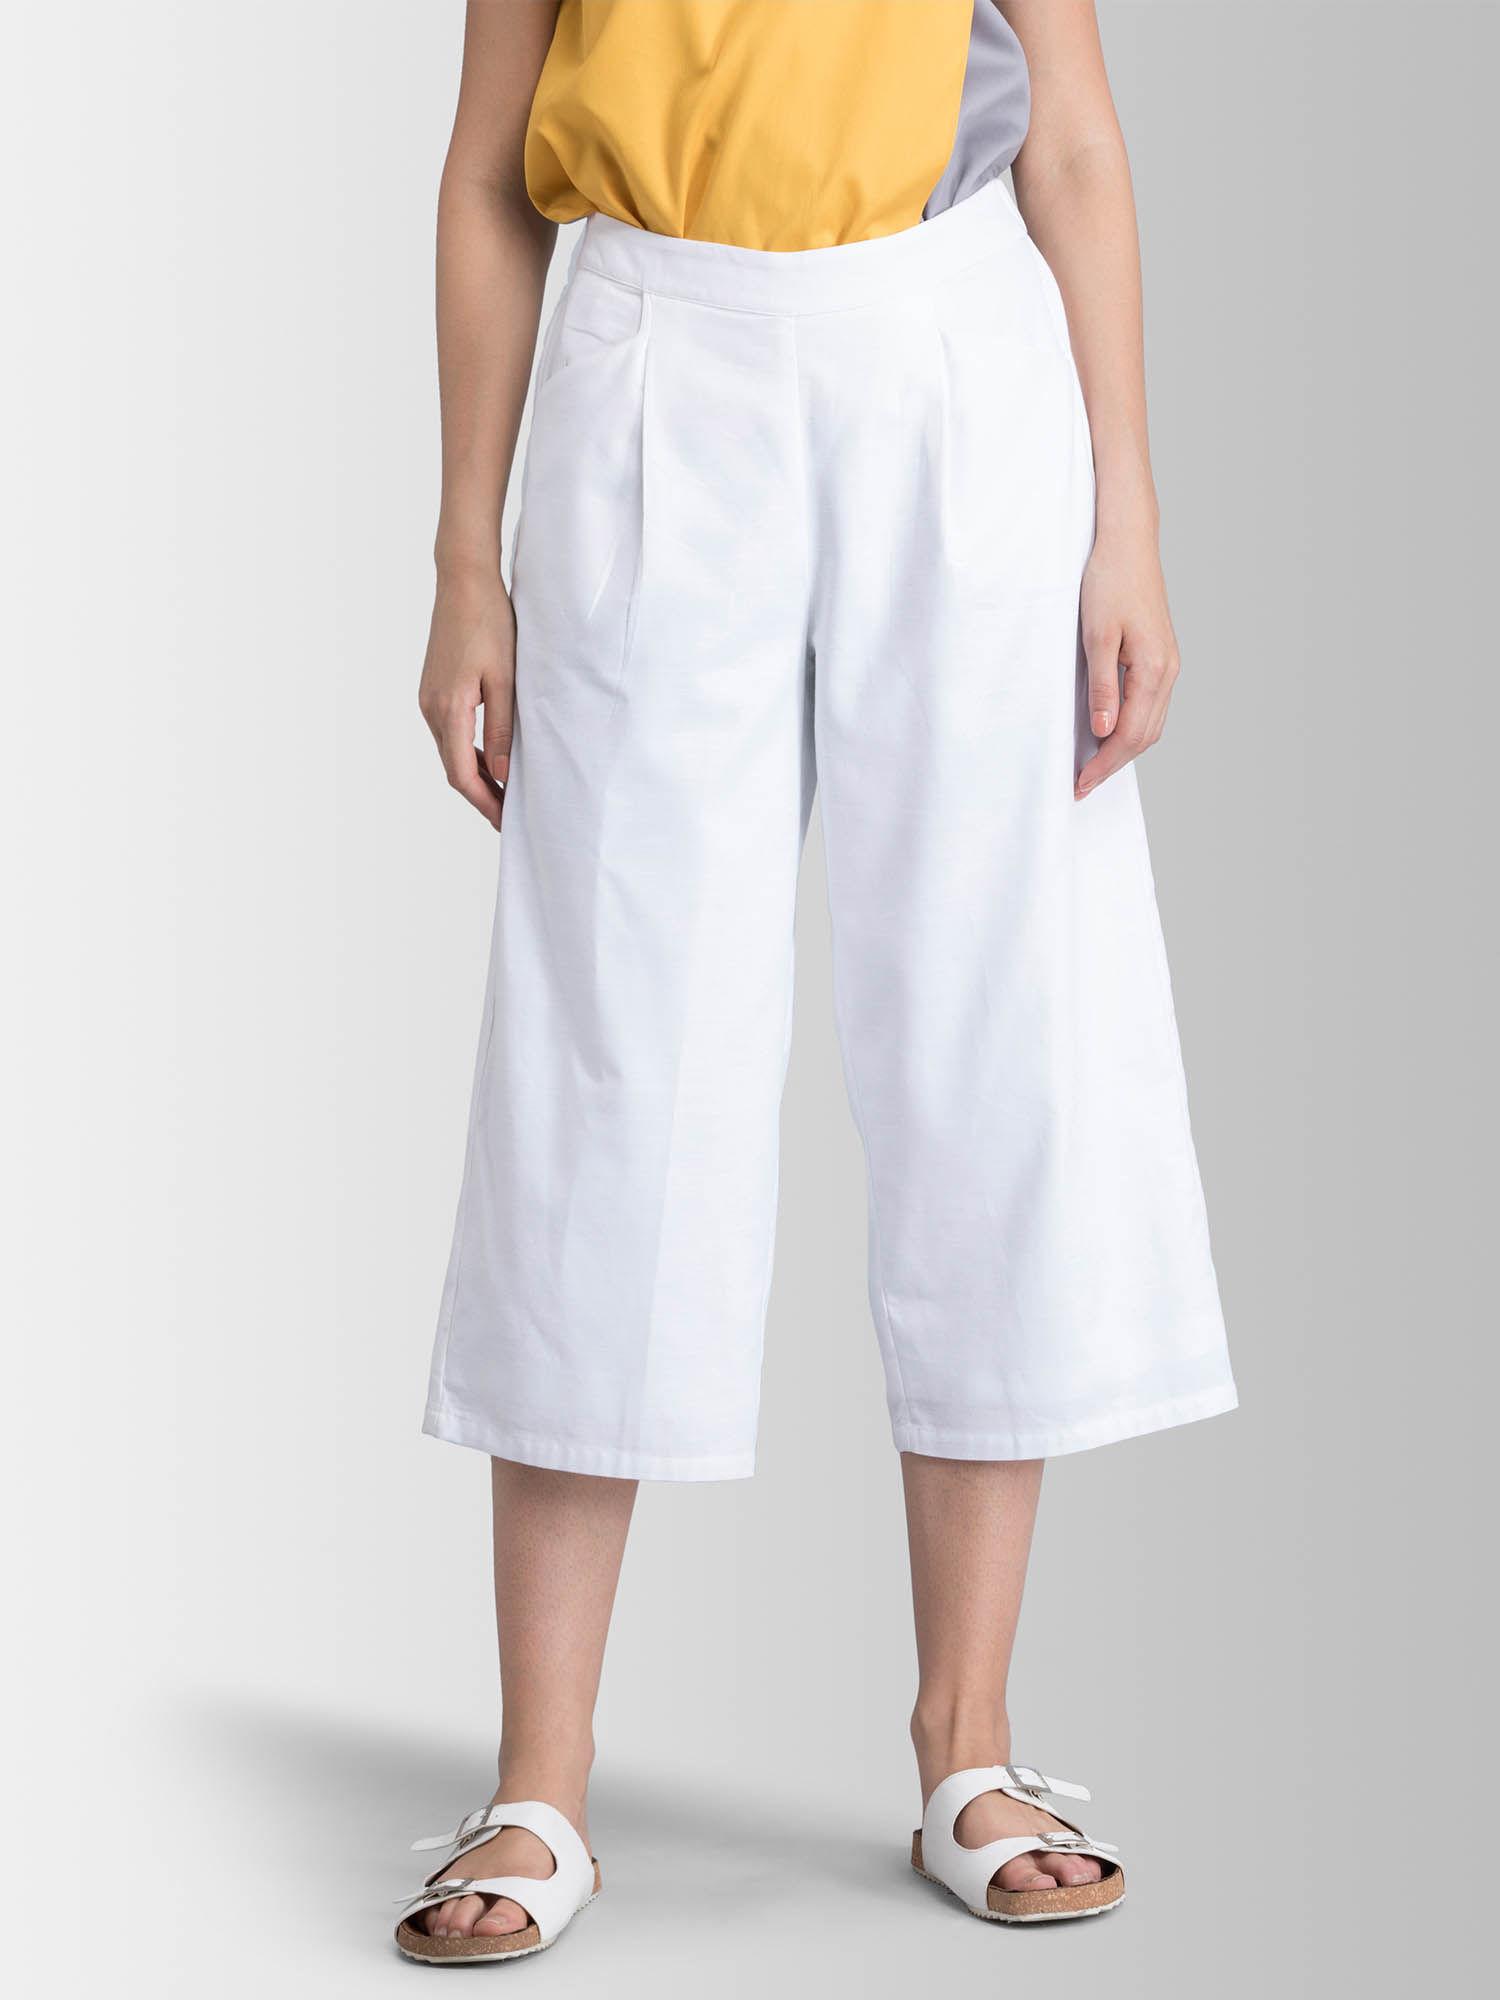 white solid culottes